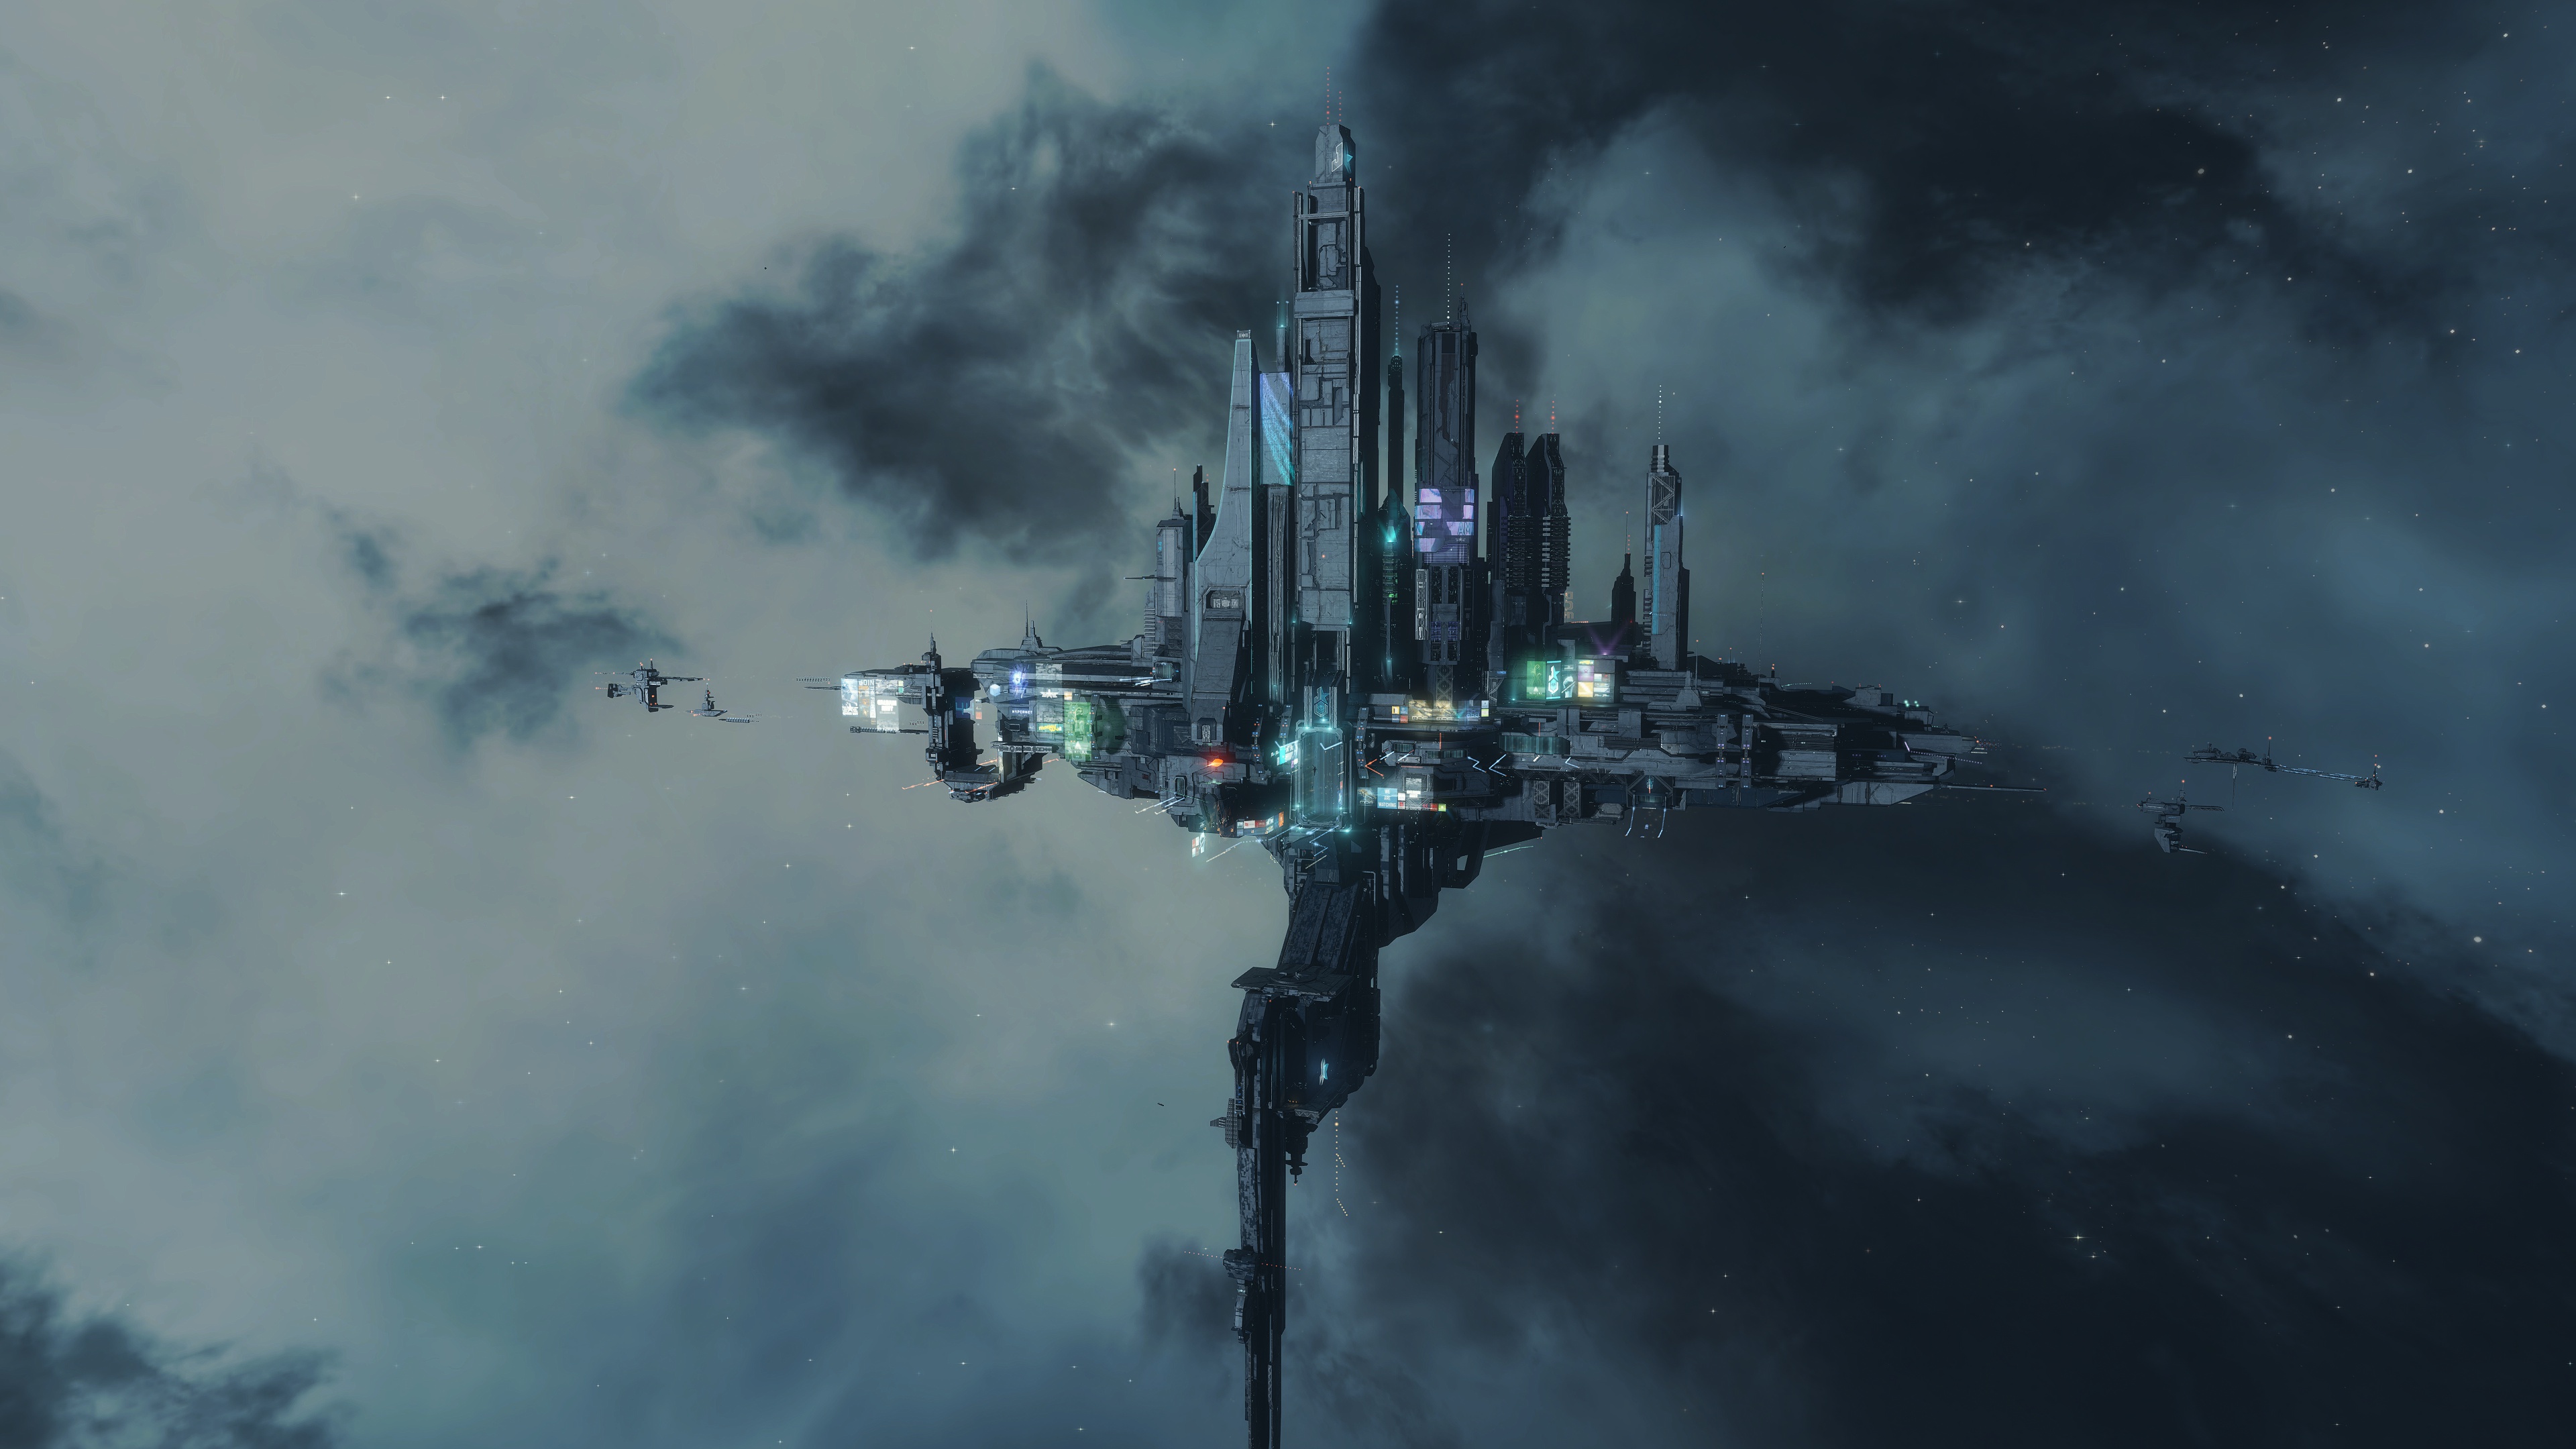 Video Game EVE Online HD Wallpaper | Background Image